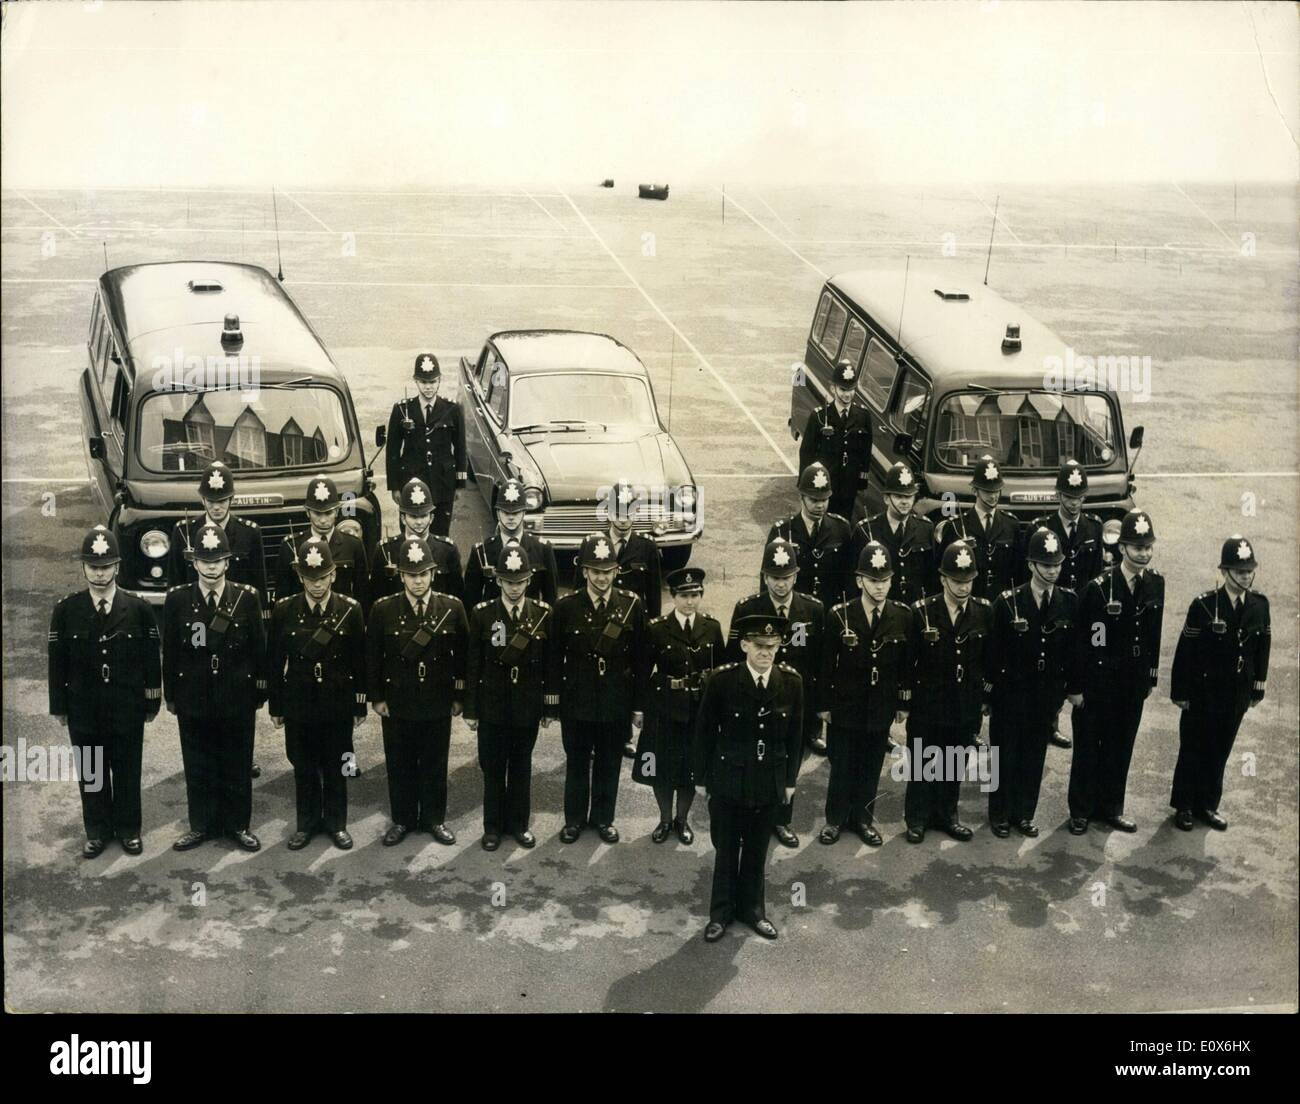 May 05, 1965 - Special patrol group to combat crime: A special 100-strong patrol group, began operations in North West London today. The aim is to beat outbreaks of crime, especially housebreaking, by saturating trouble spots with uniformed policemen. Mr. J.L. Waldron, Assistant Commissioner '''A'' Department, is responsible for the overall control of the group, which consists of five inspectors, 12 sergeants, 80 constables and two women constables, under the officer-in-charge, Supt. John Gerrard Stock Photo